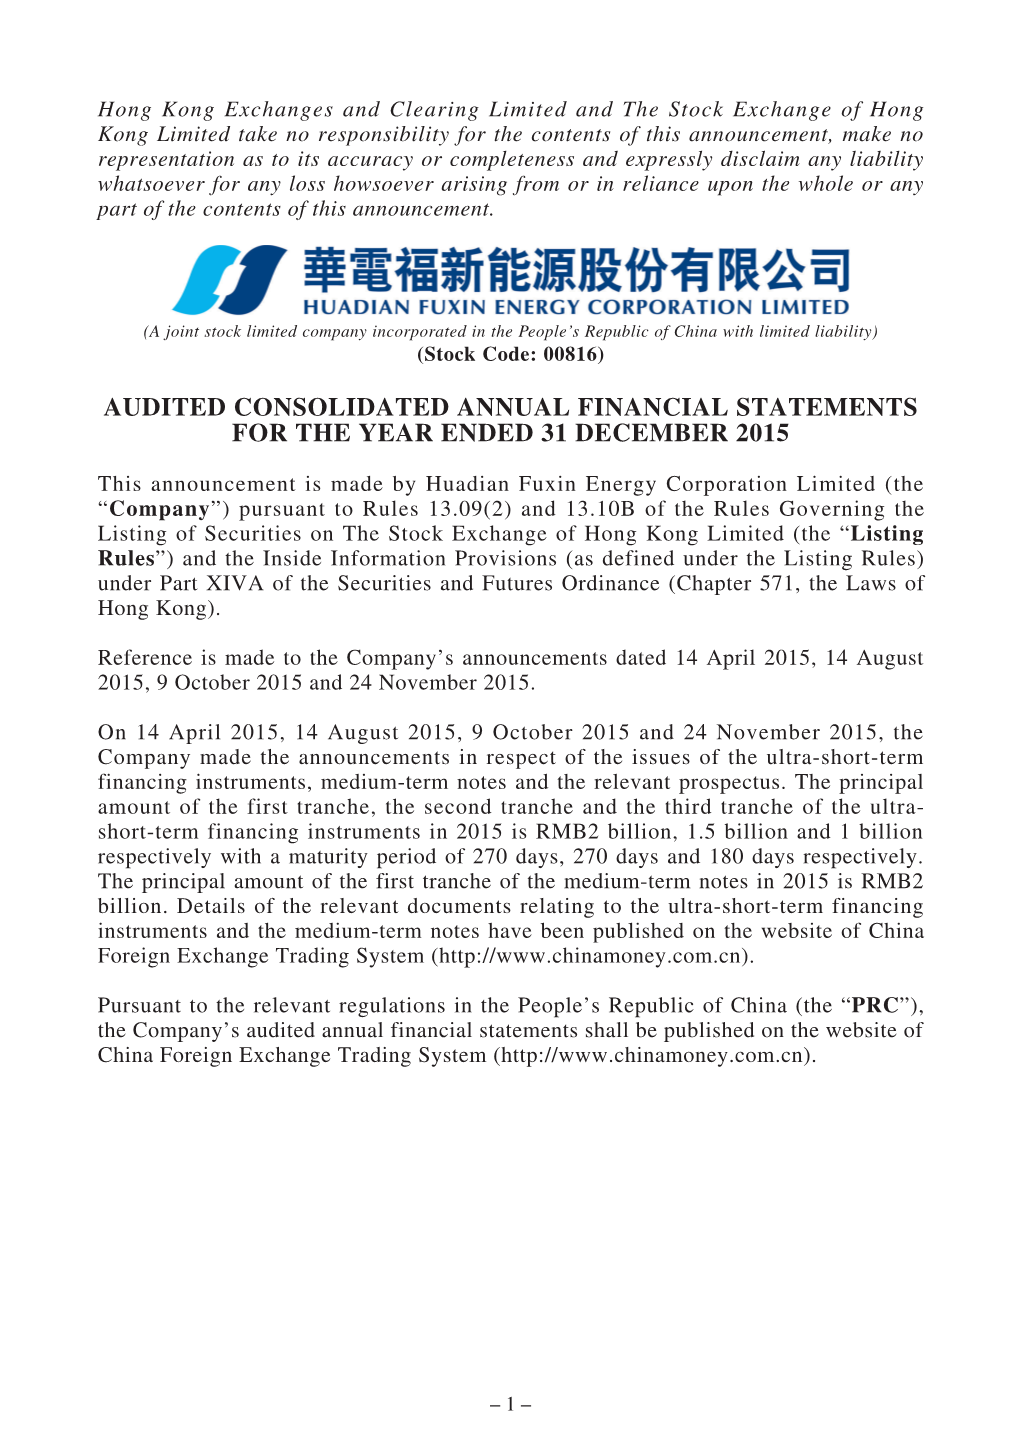 Huadian Fuxin Energy Corporation Limited 2015 Financial Report